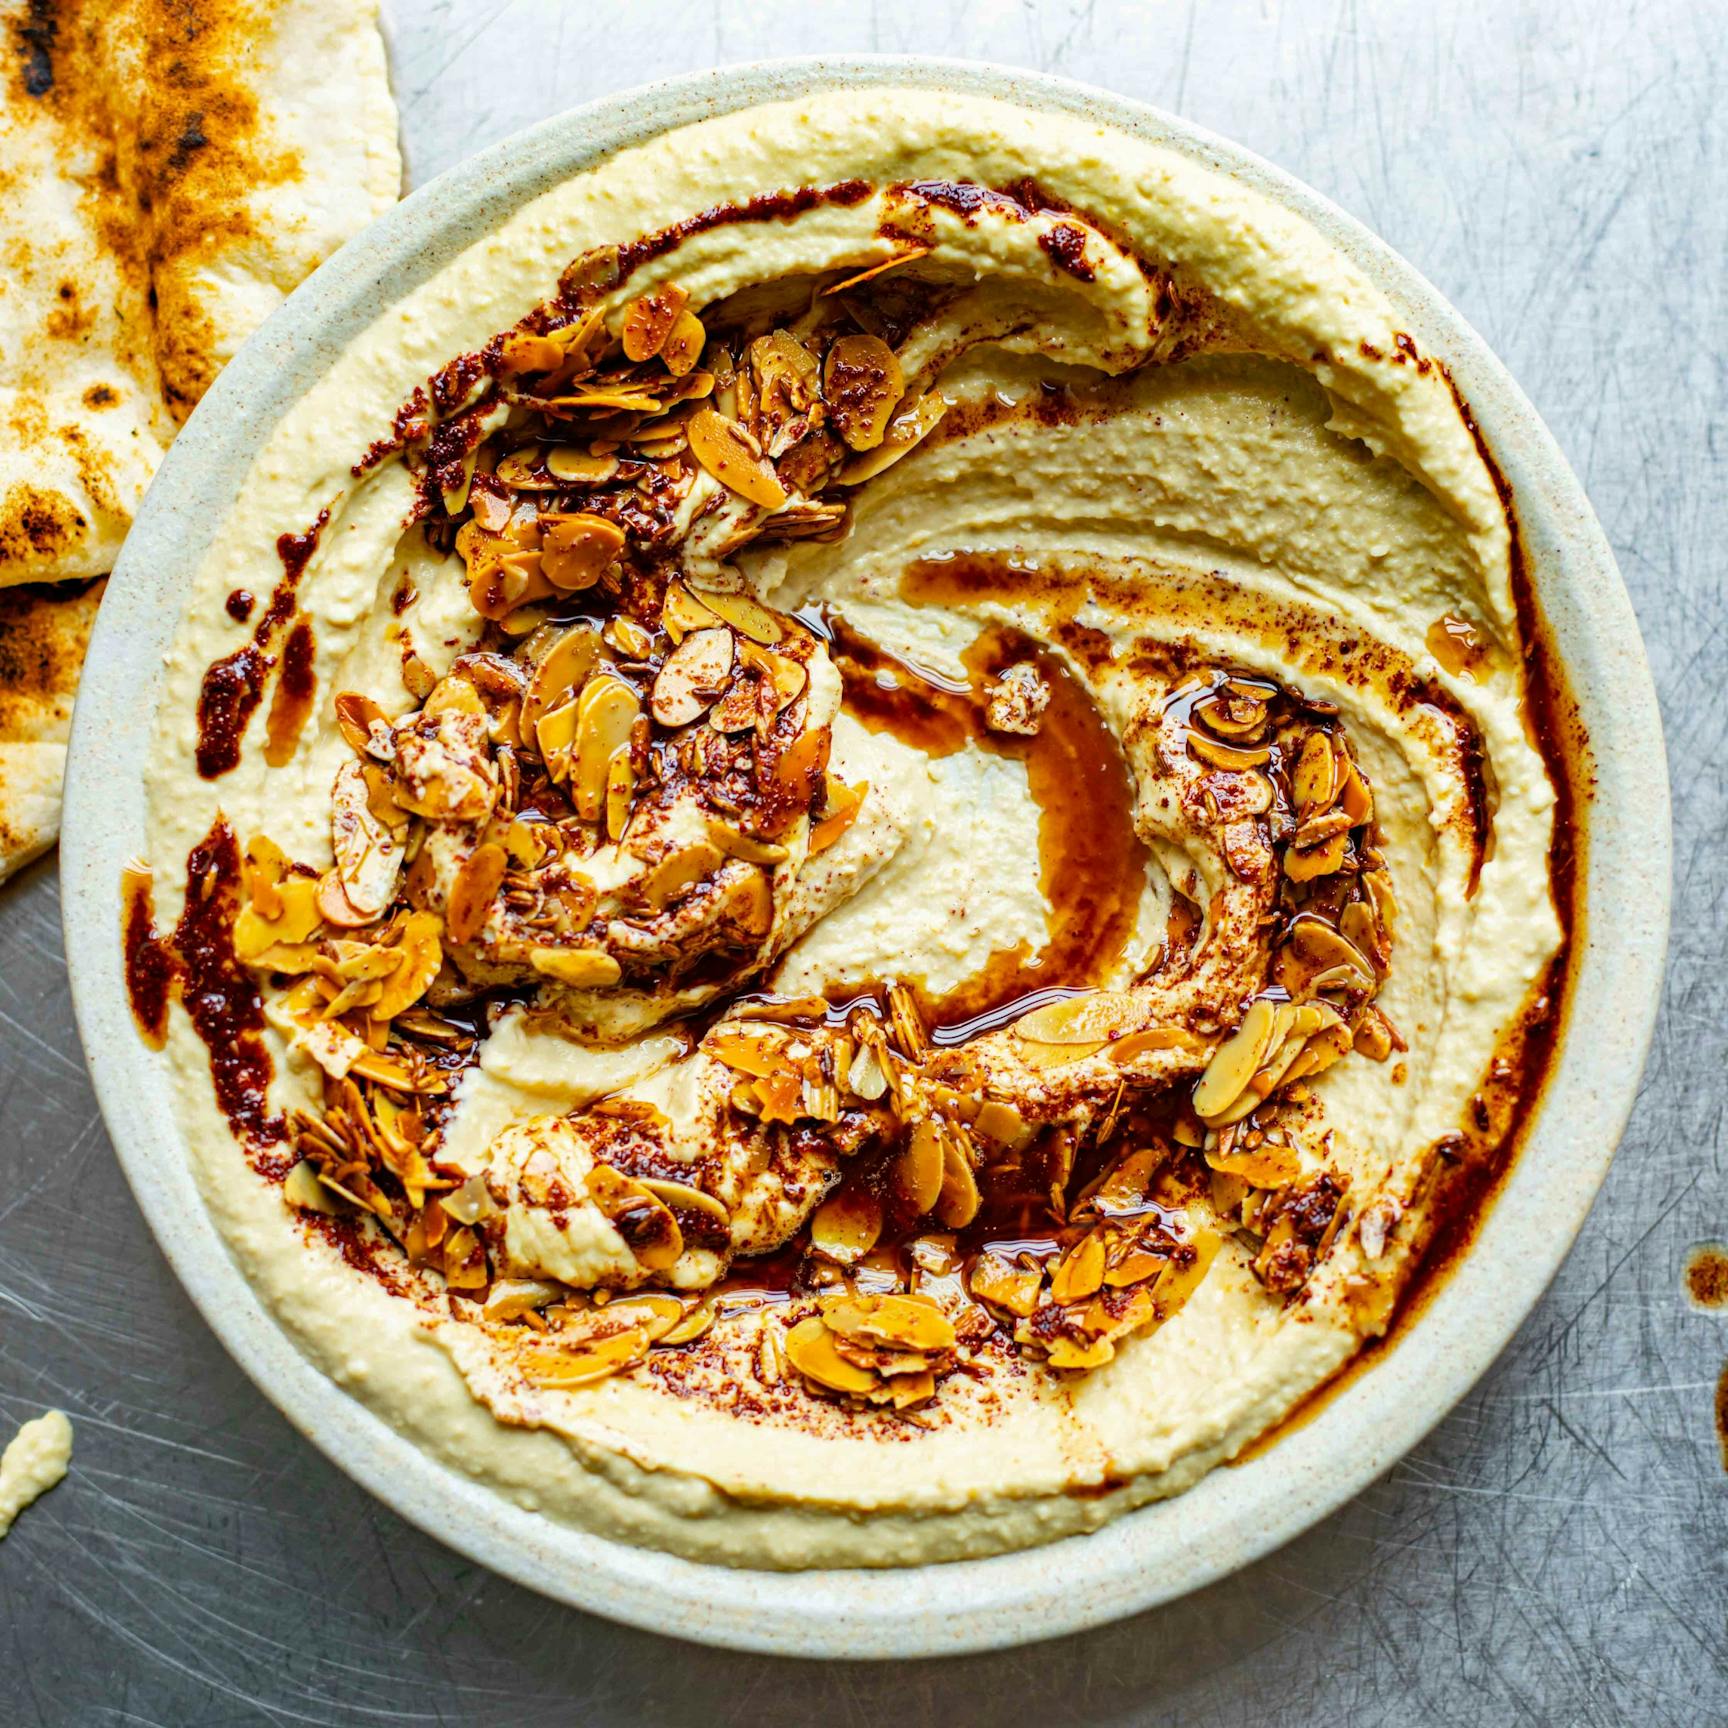 Hummus With Toasted Cinnamon Almond Drizzle